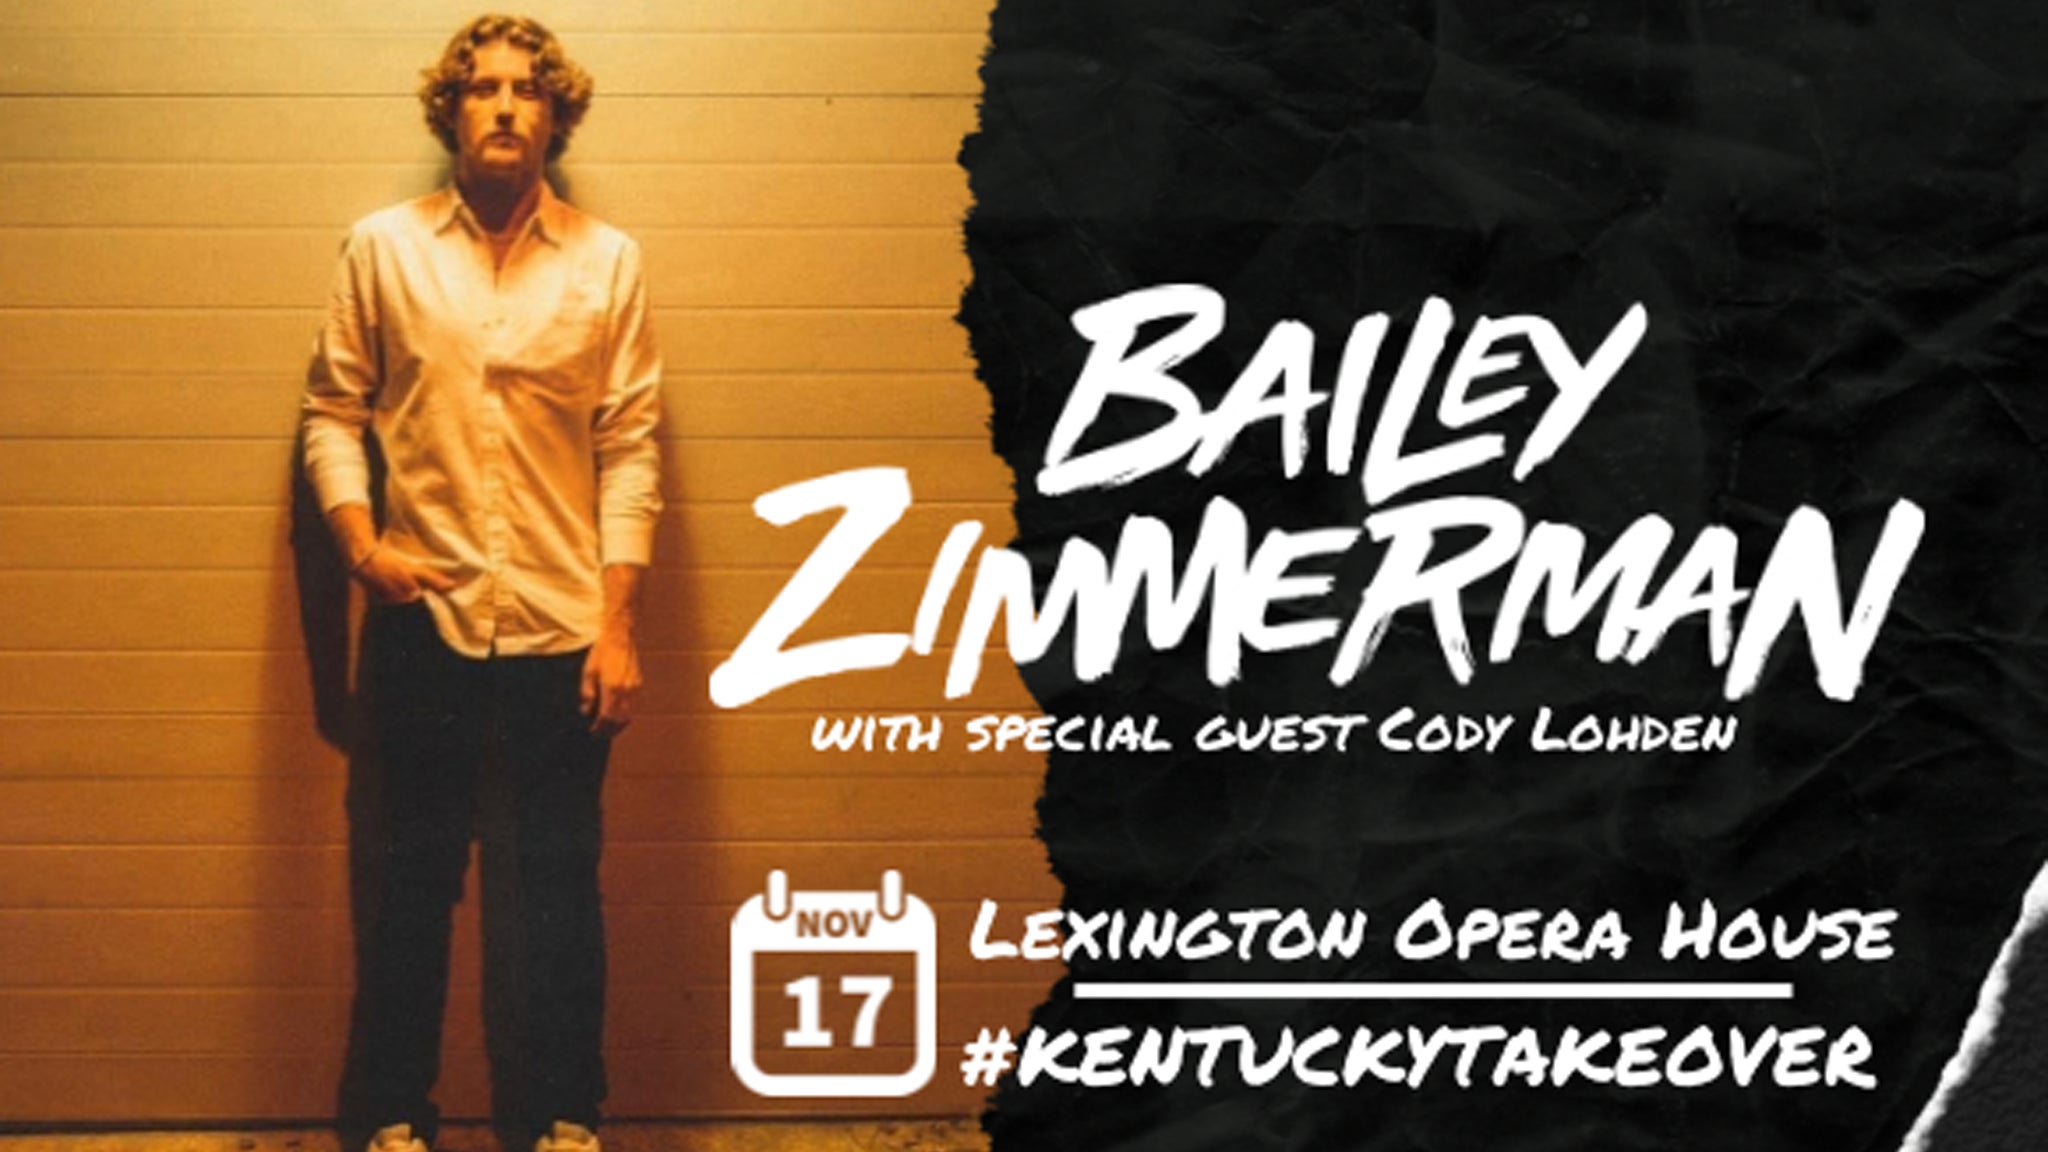 Bailey Zimmerman in Lexington promo photo for Limited presale offer code